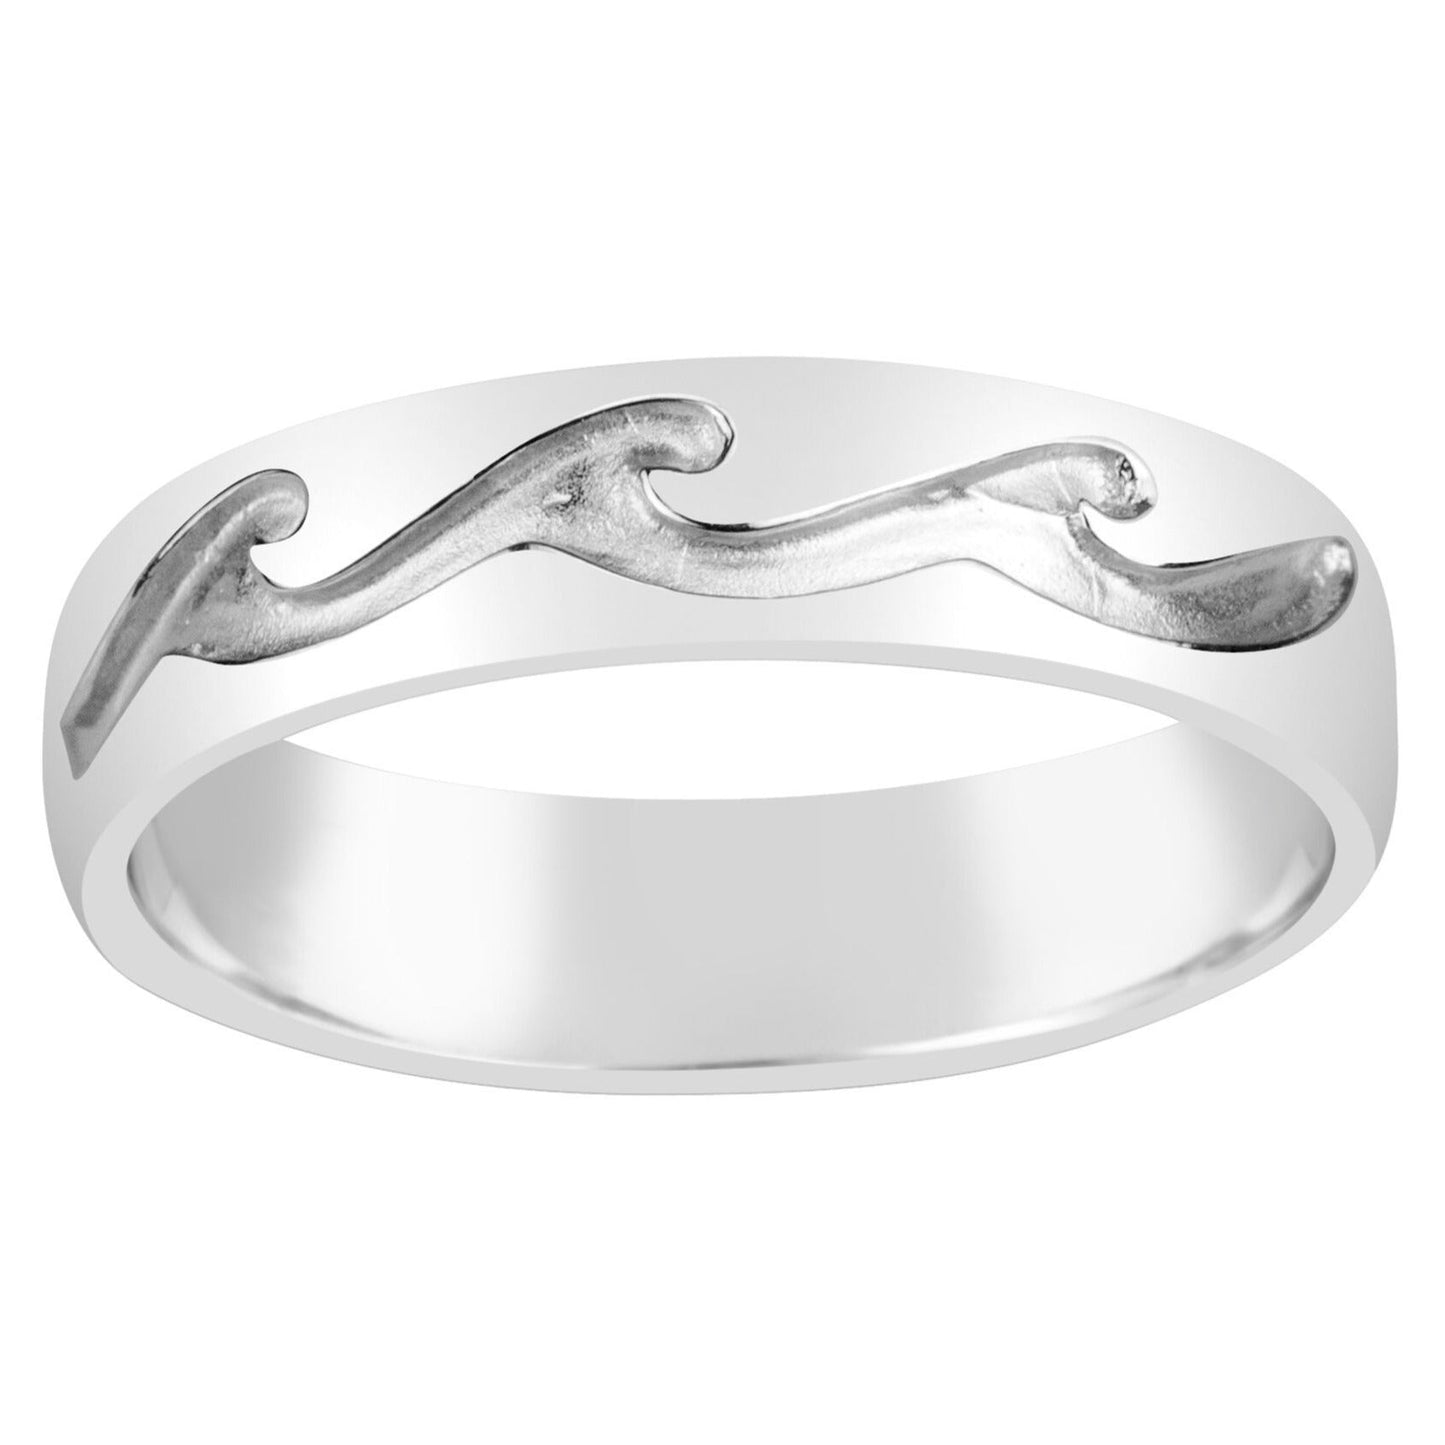 Gents Sterling Silver Textured Wave Design Ring Q209